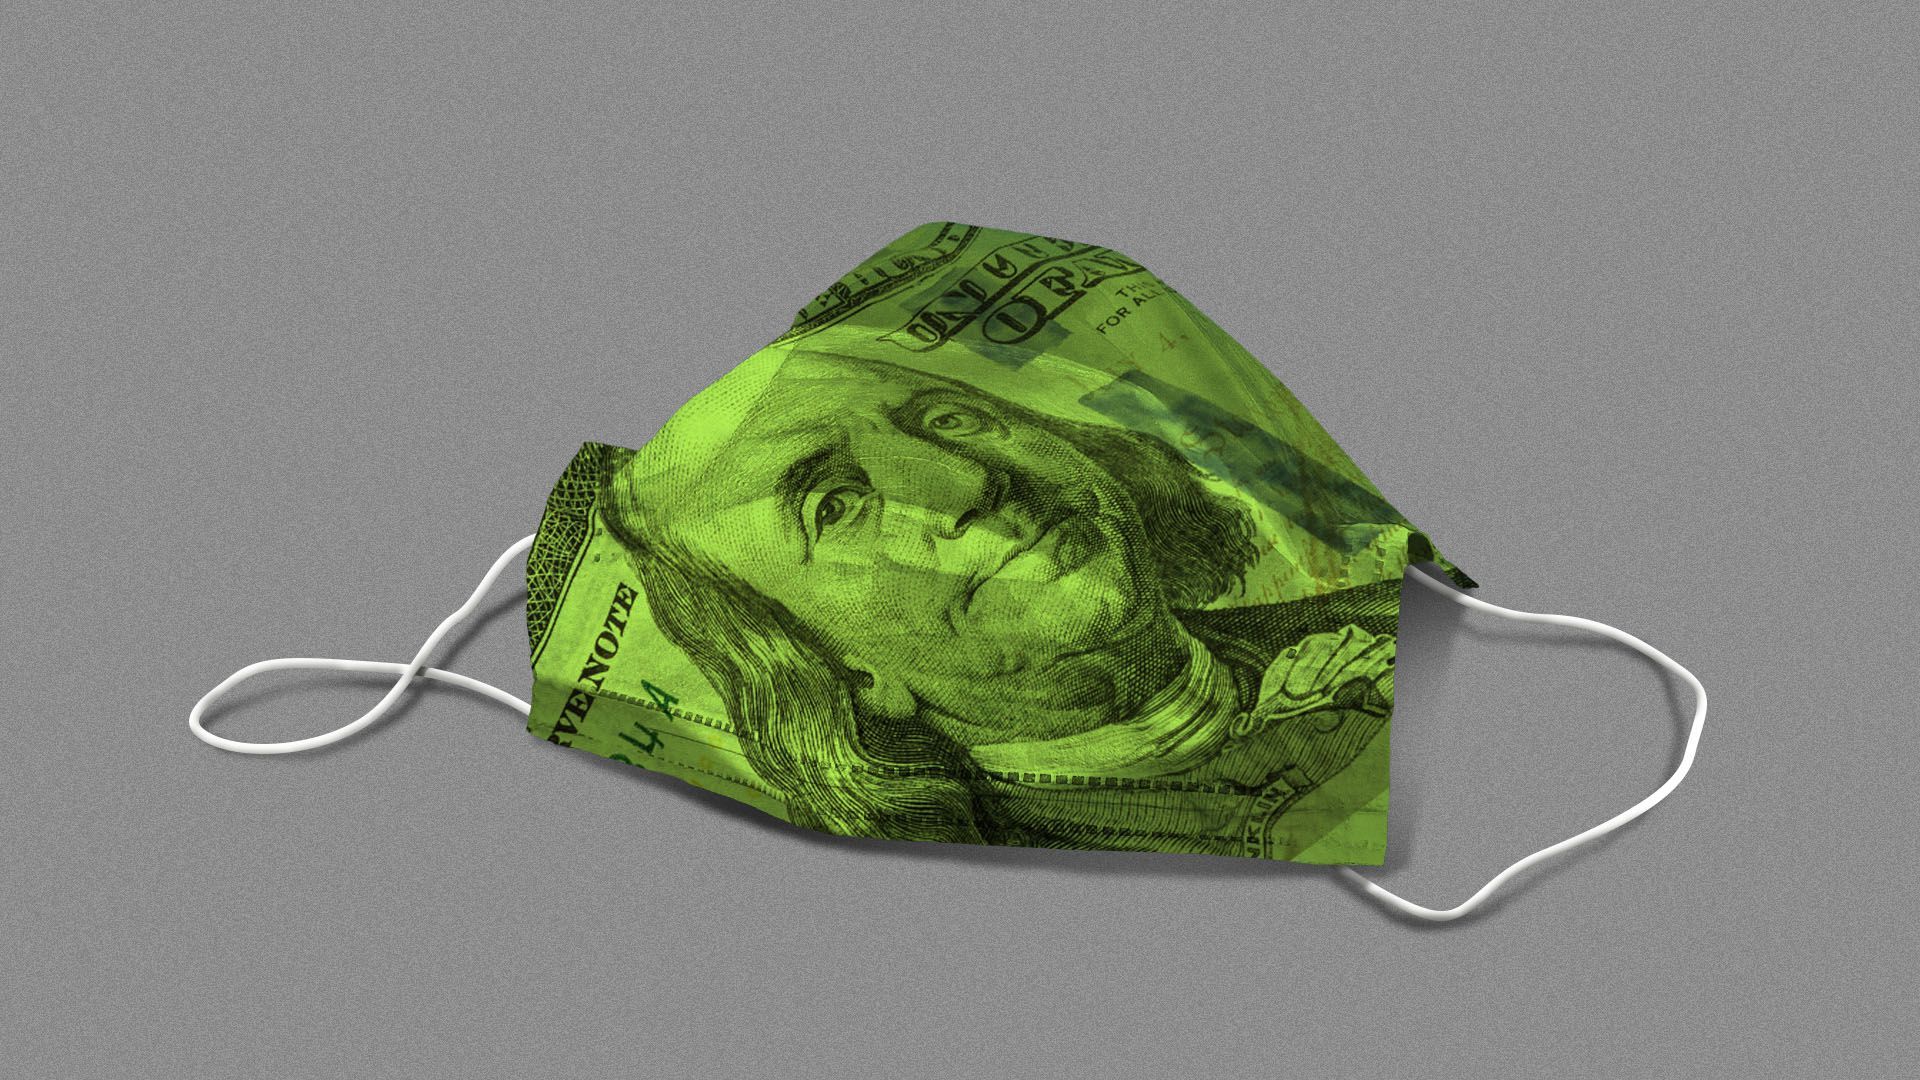 Illustration of a medical mask with a hundred dollar bill on it crumpled on the ground